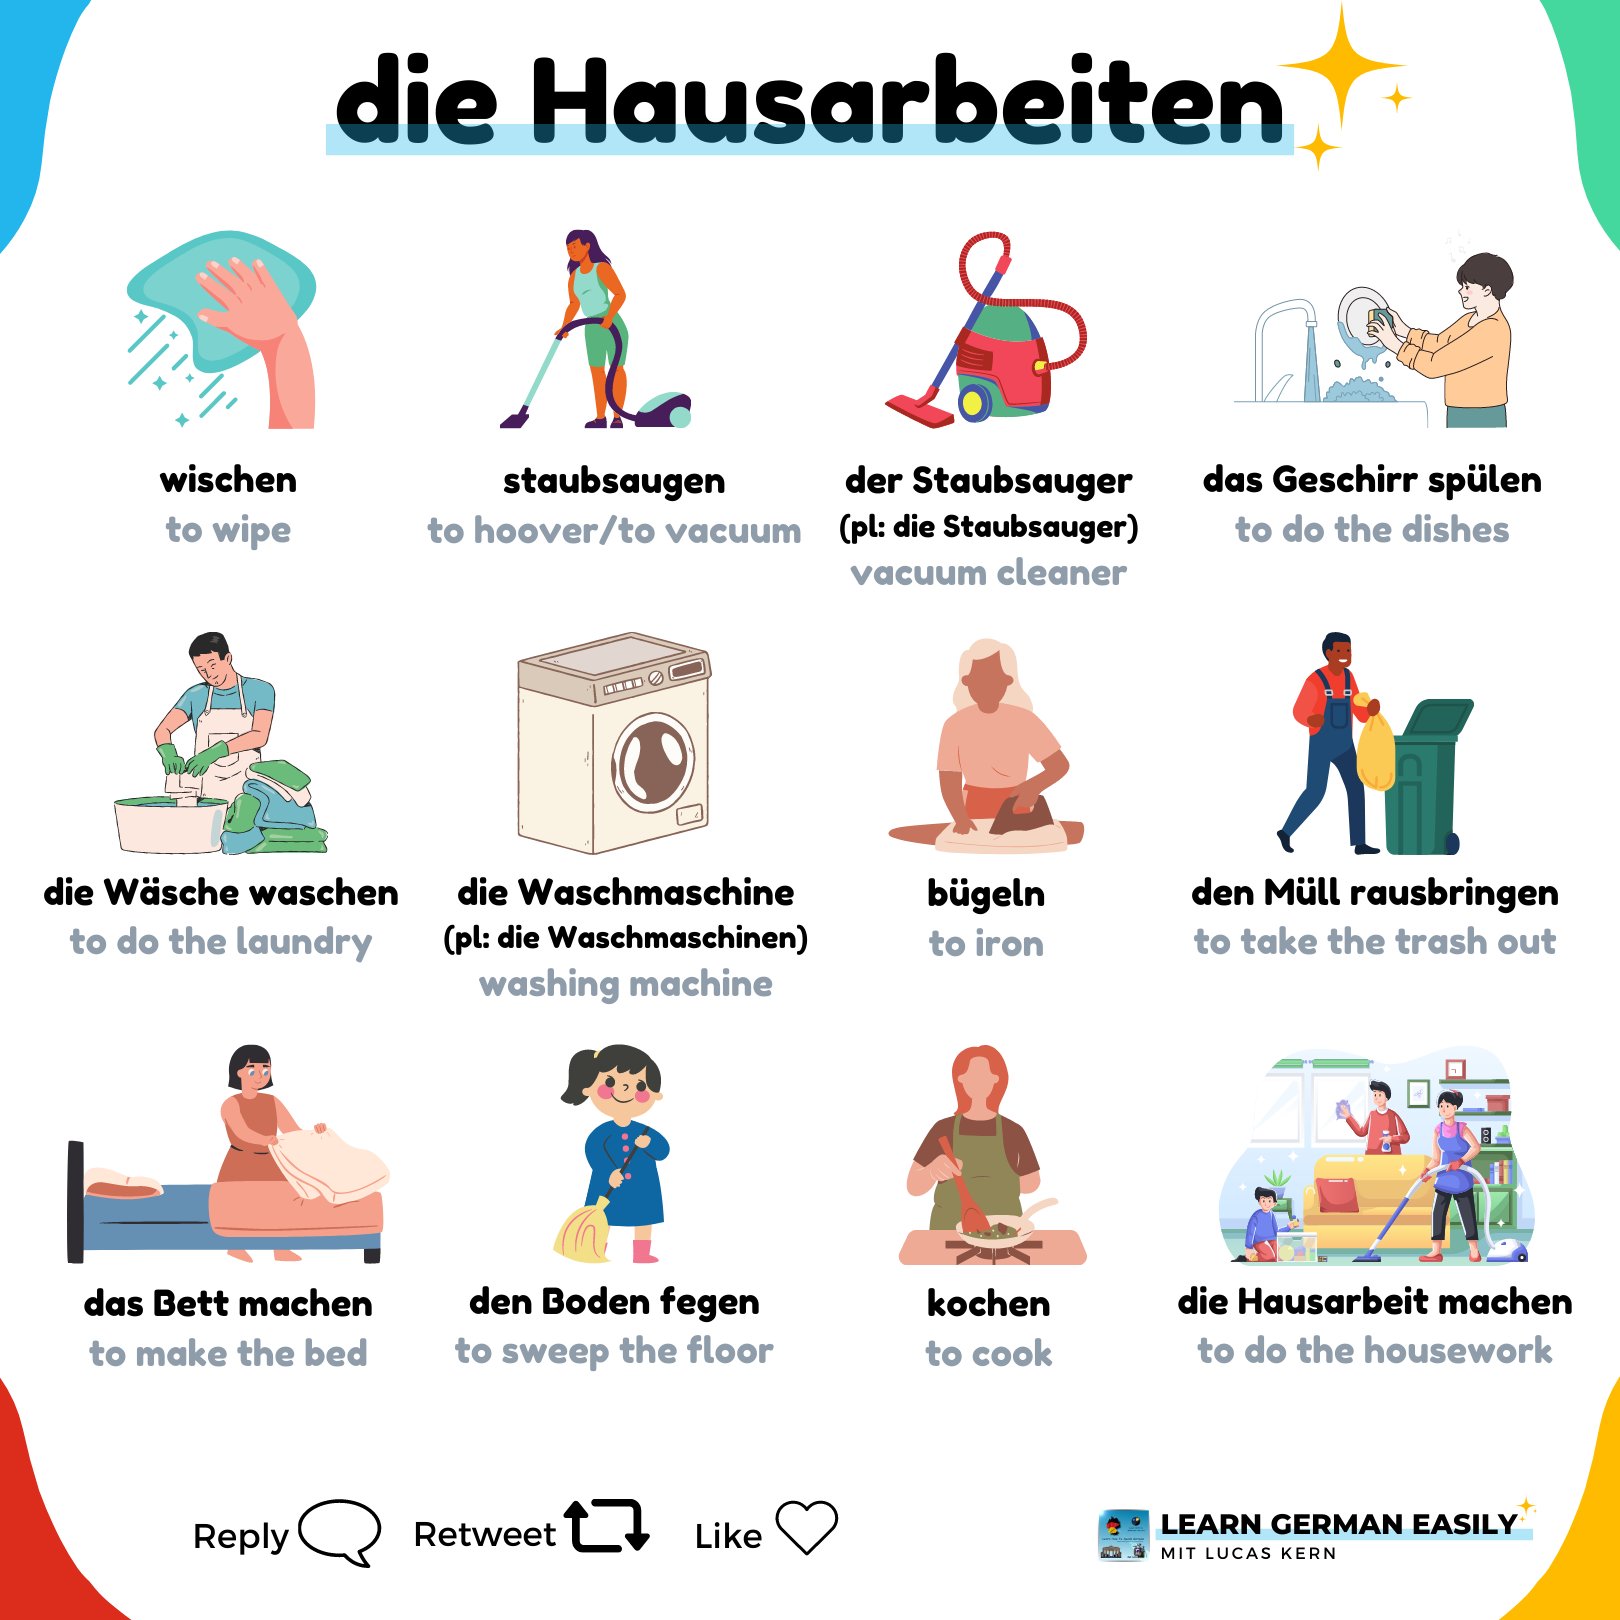 Learn-German-Easily on X: "Let's face it: we all do most of our chores on  the weekend. So learn how to talk about those on this Saturday! Which one  do you dislike the